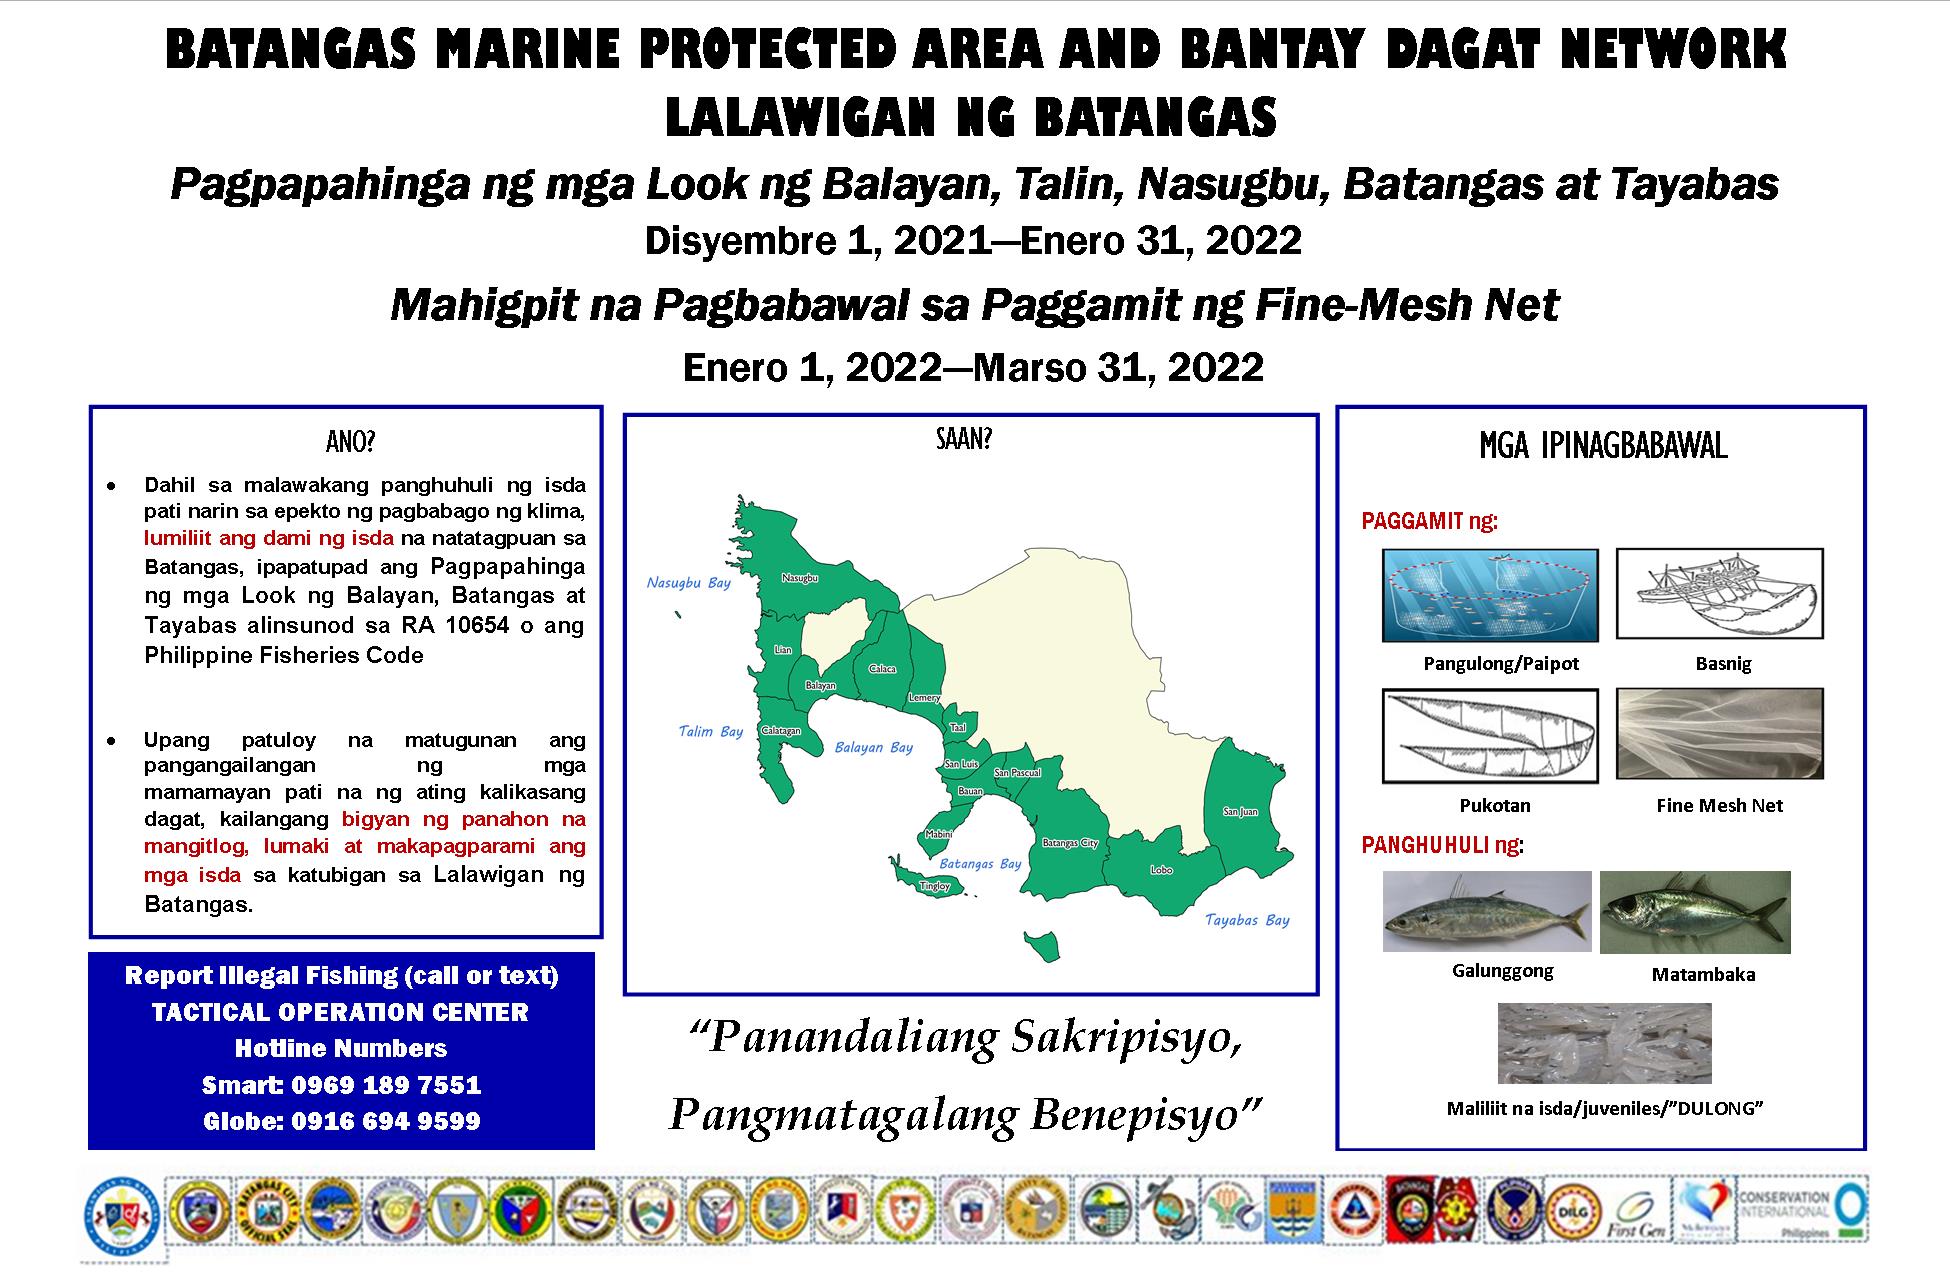 Batangas Province reimplements rest of the bays